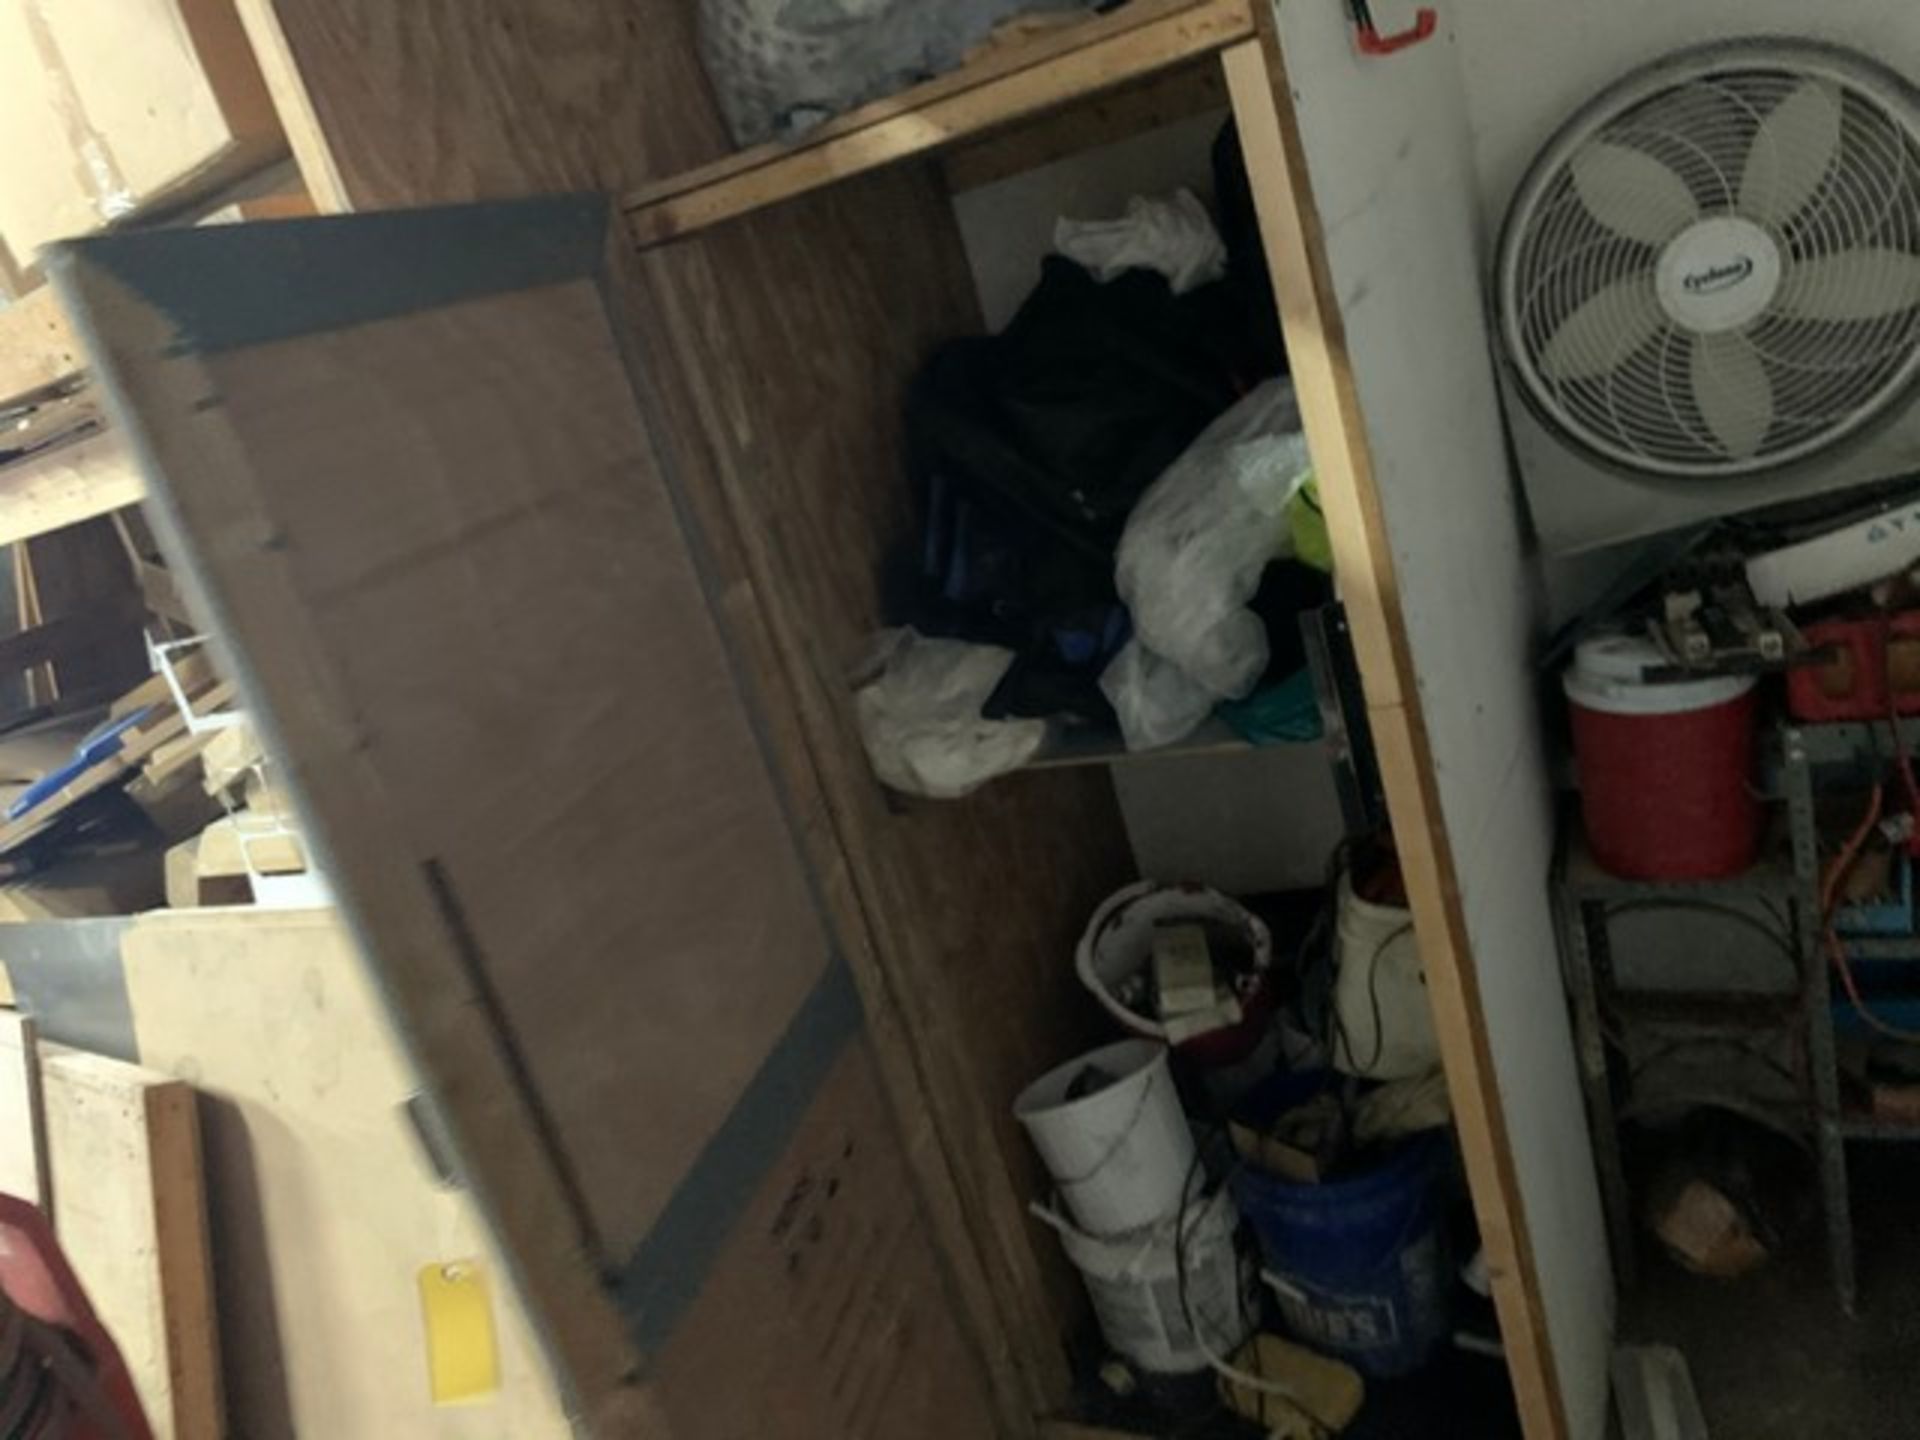 LOT CONTENTS OF WOOD CABINET - BAGS / BUCKETS OF TOOLING, ETC